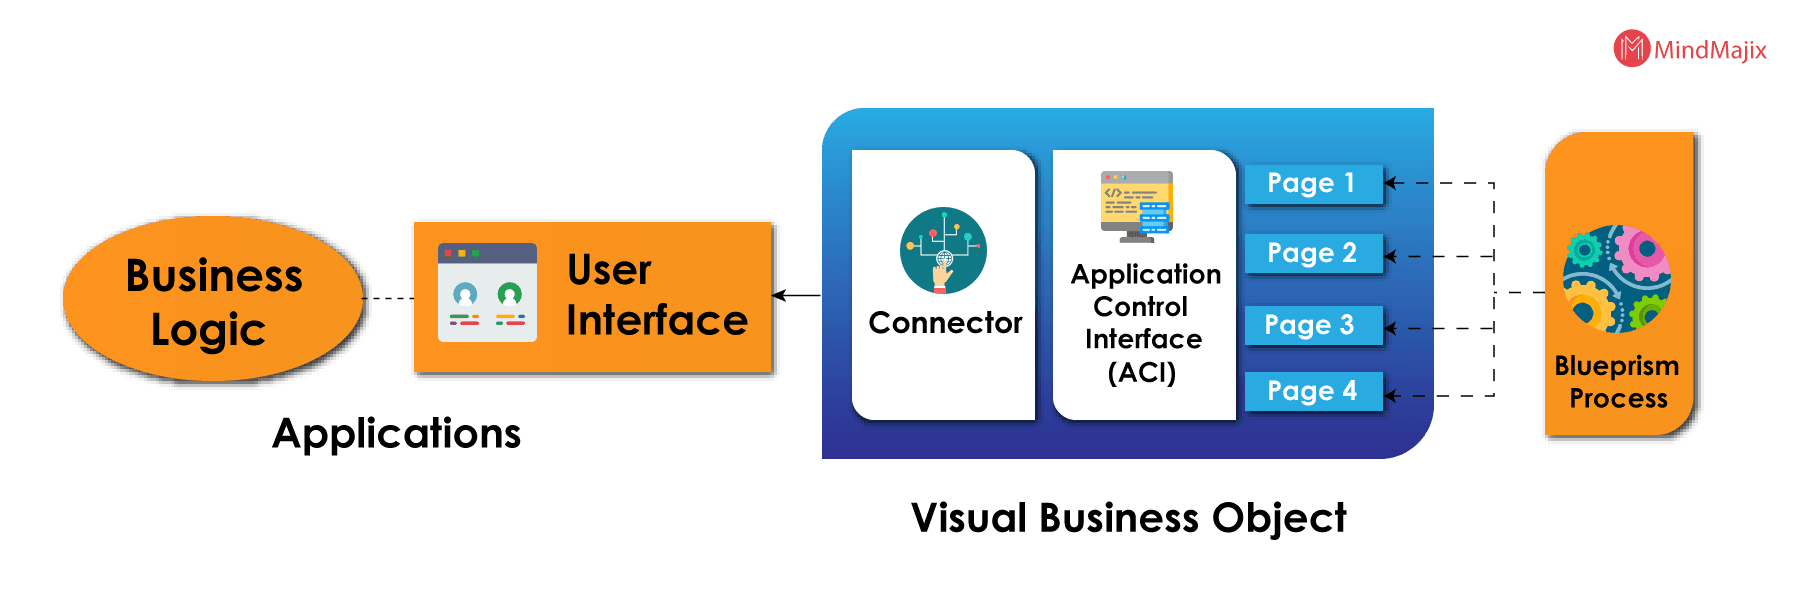 Visual Business Object 